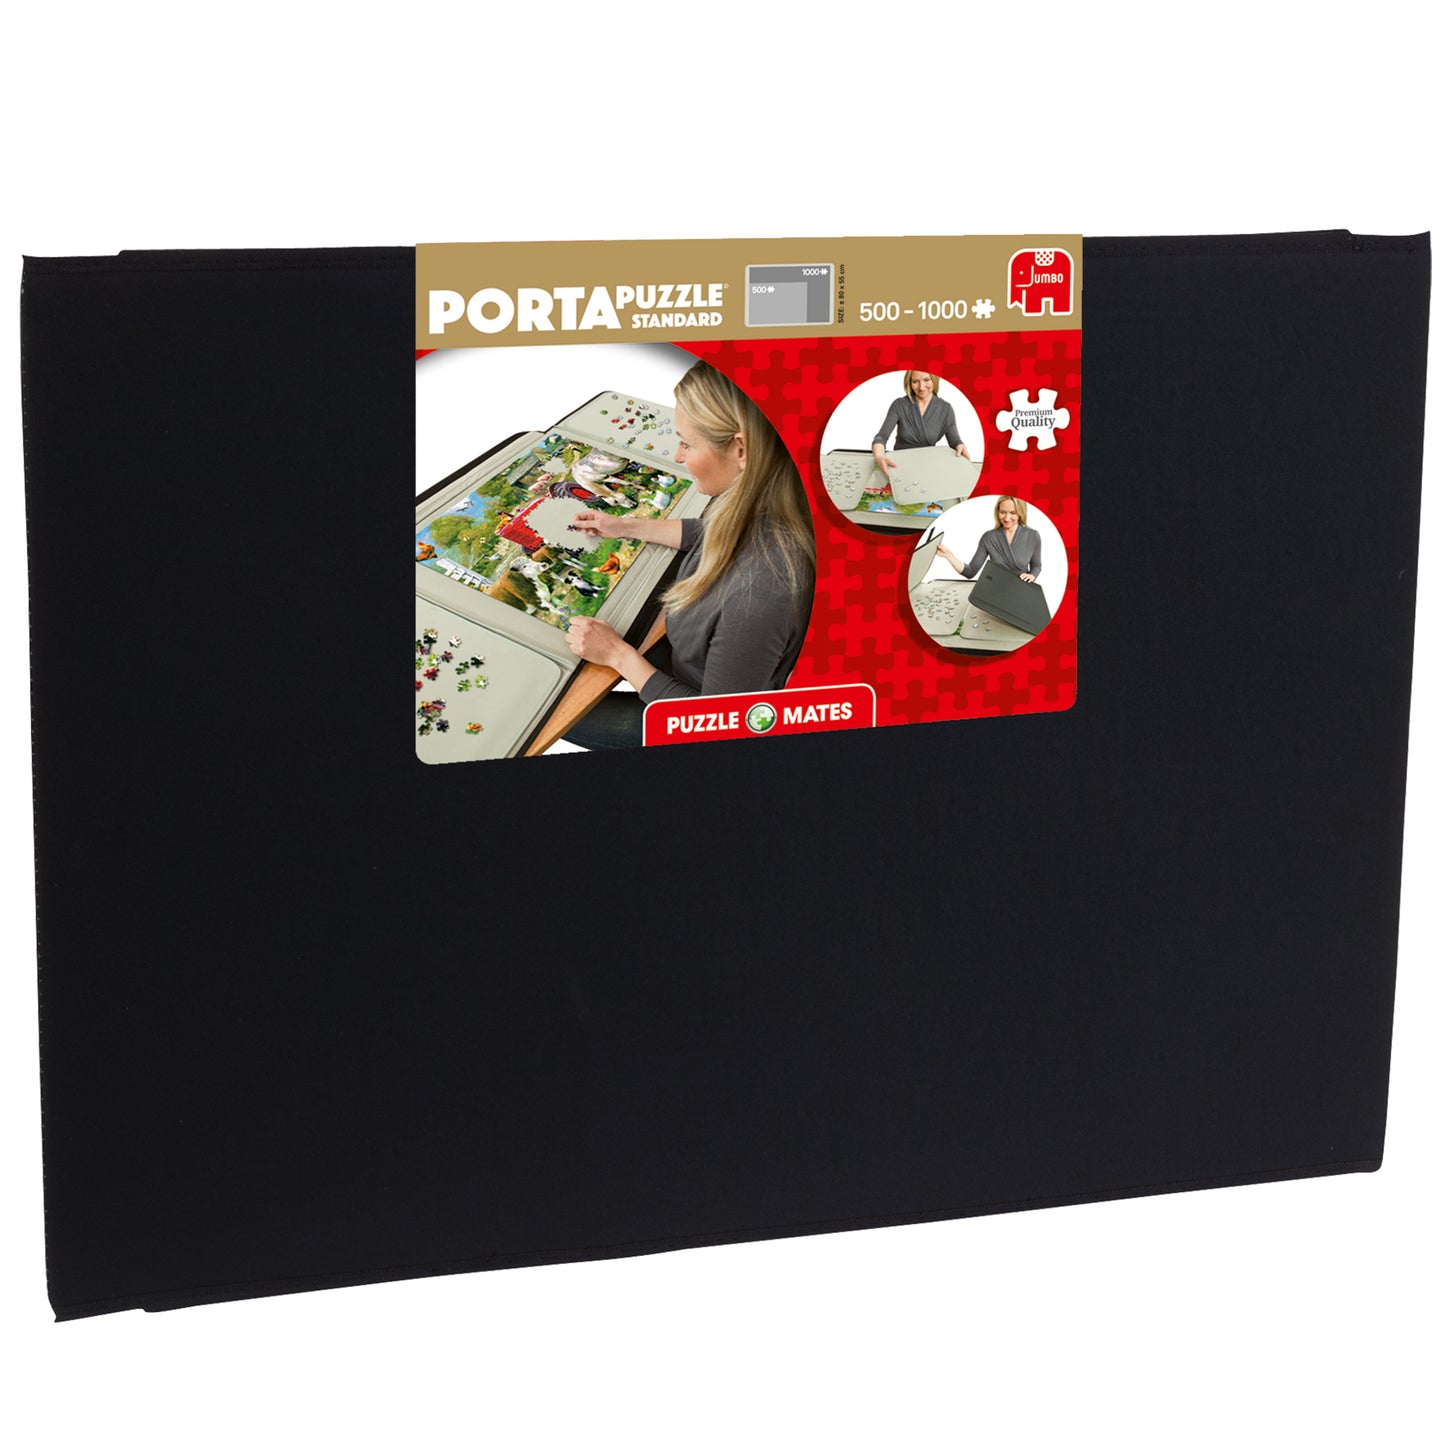 Puzzle Mates - Portapuzzle Standard (up to 1000 piece puzzles) - product image - Jumboplay.com